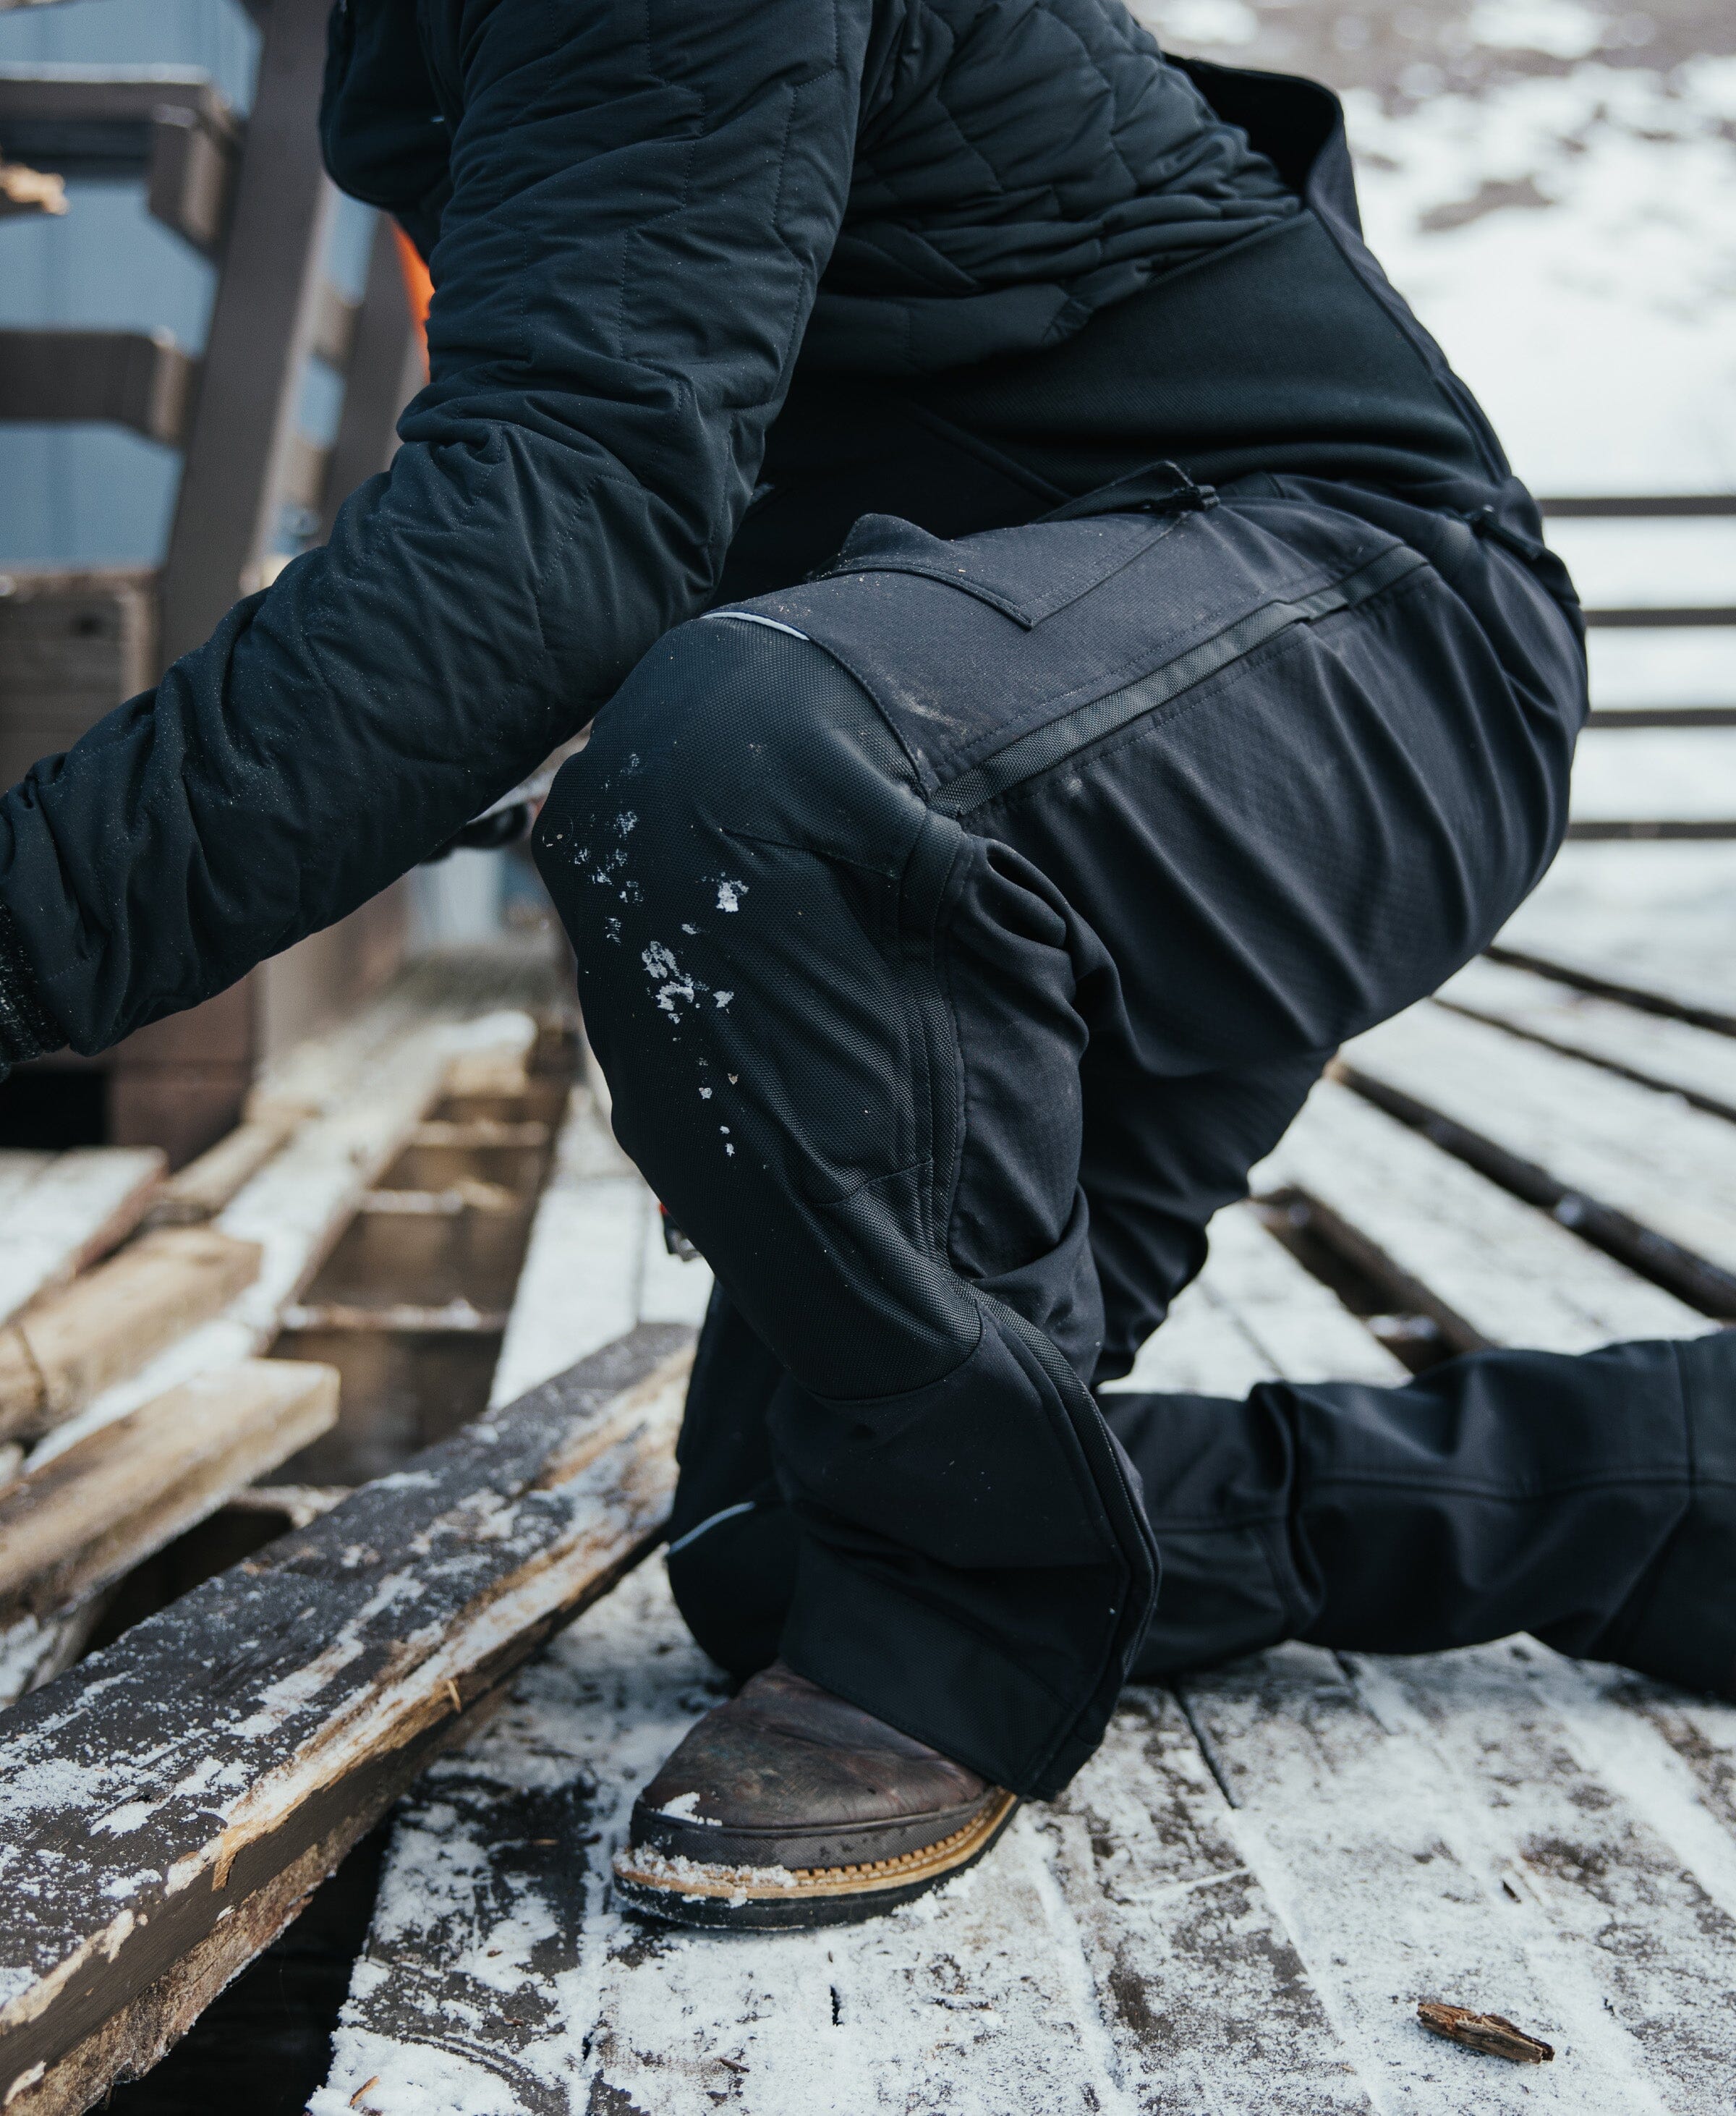 EXTREME COLD WEATHER TROUSERS WORKING THERMAL WINTER PANTS MEN DELTAPLUS  ICEBERG